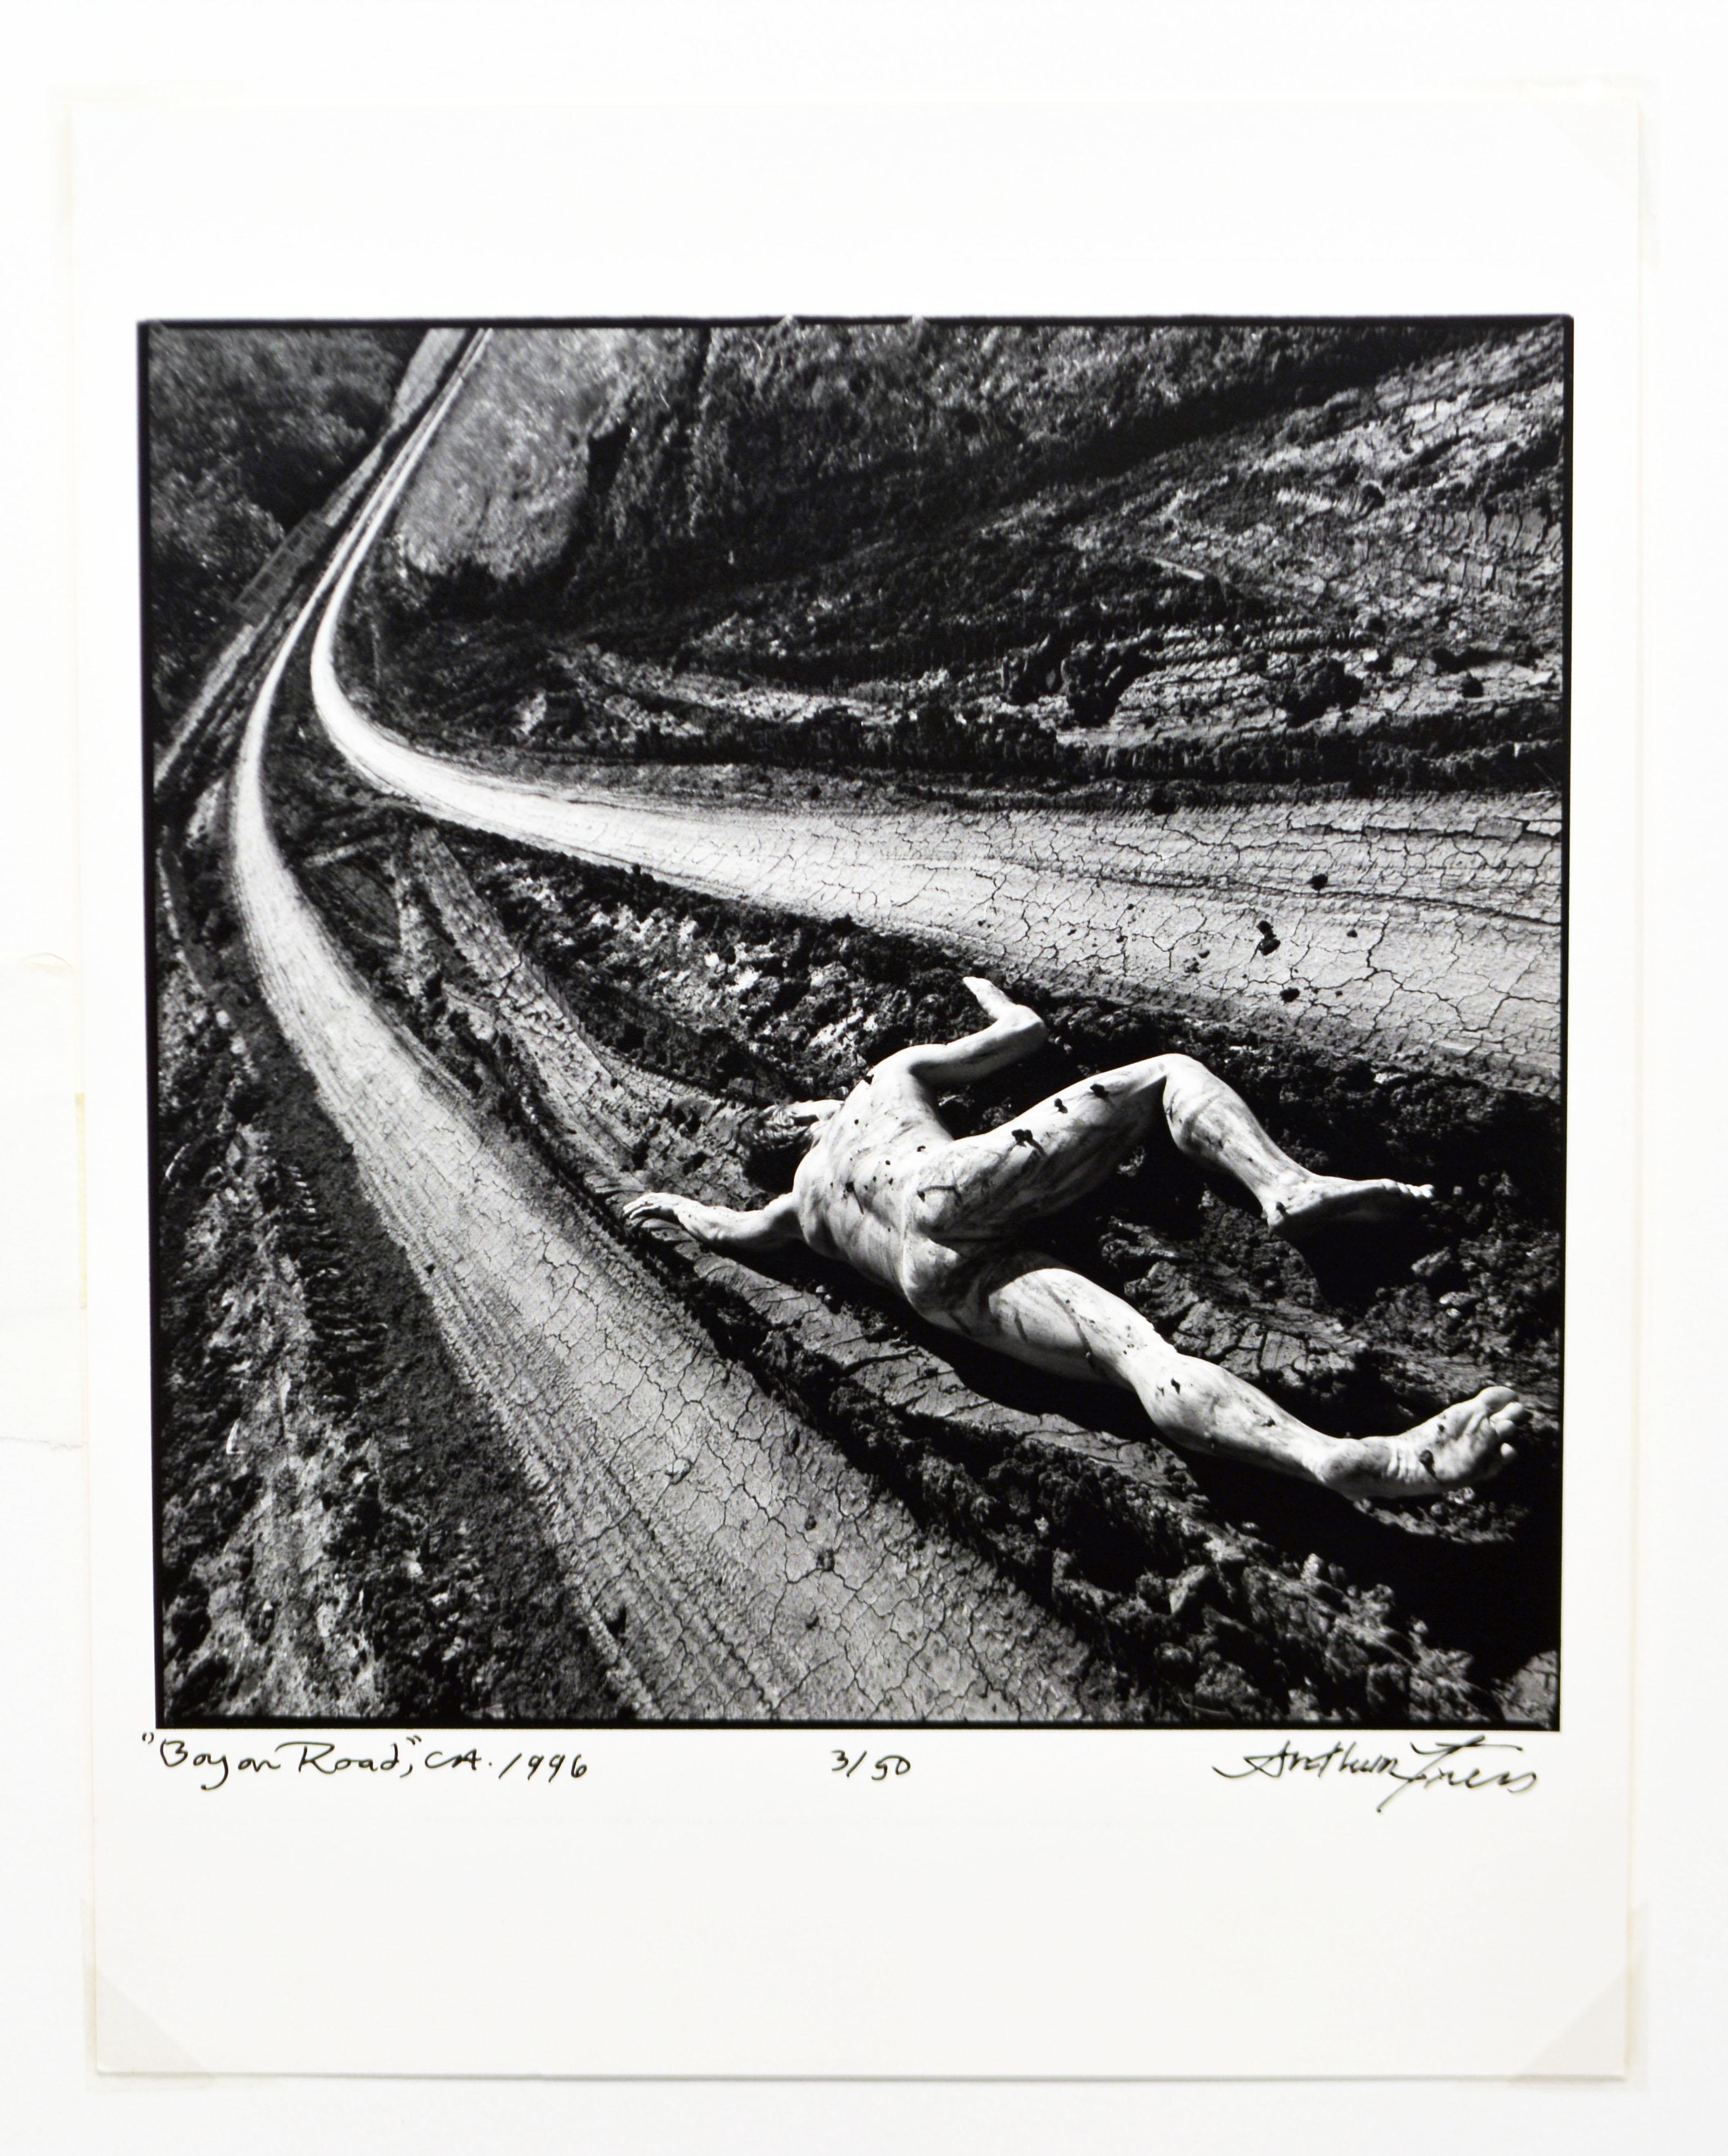 American Arthur Tress, 'Boy on Road 1996' Original Signed and Numbered Photograph